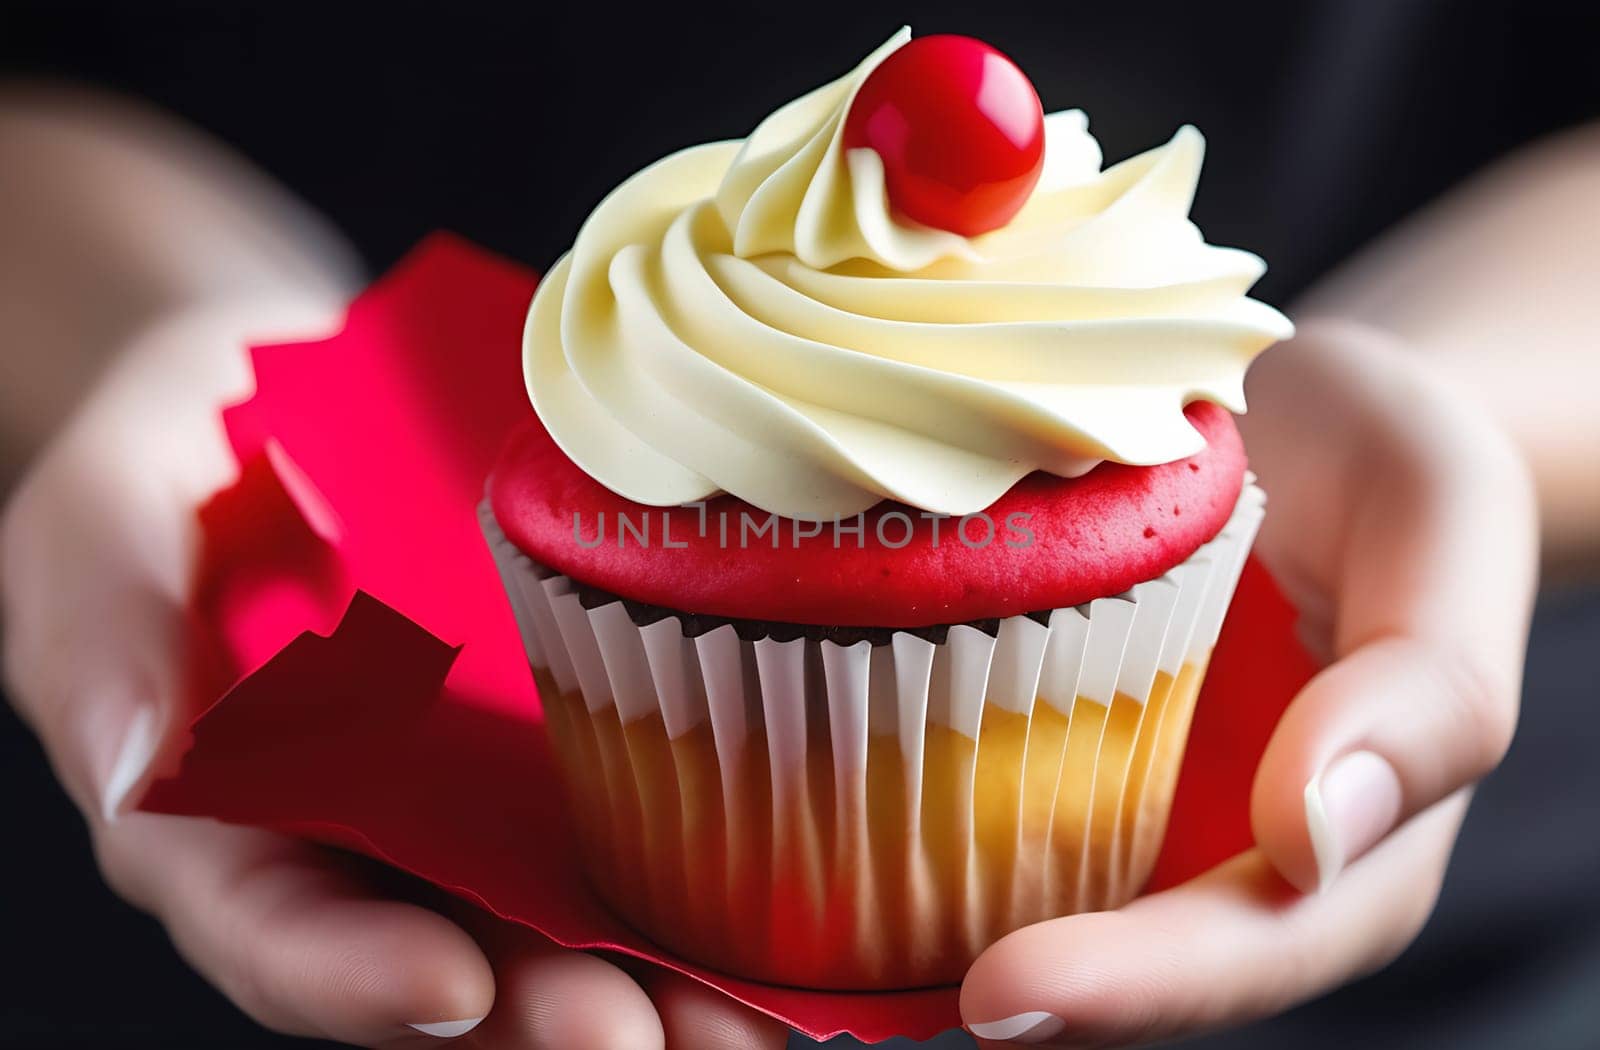 Delicious raspberry cupcake with white chocolate in hands, close-up